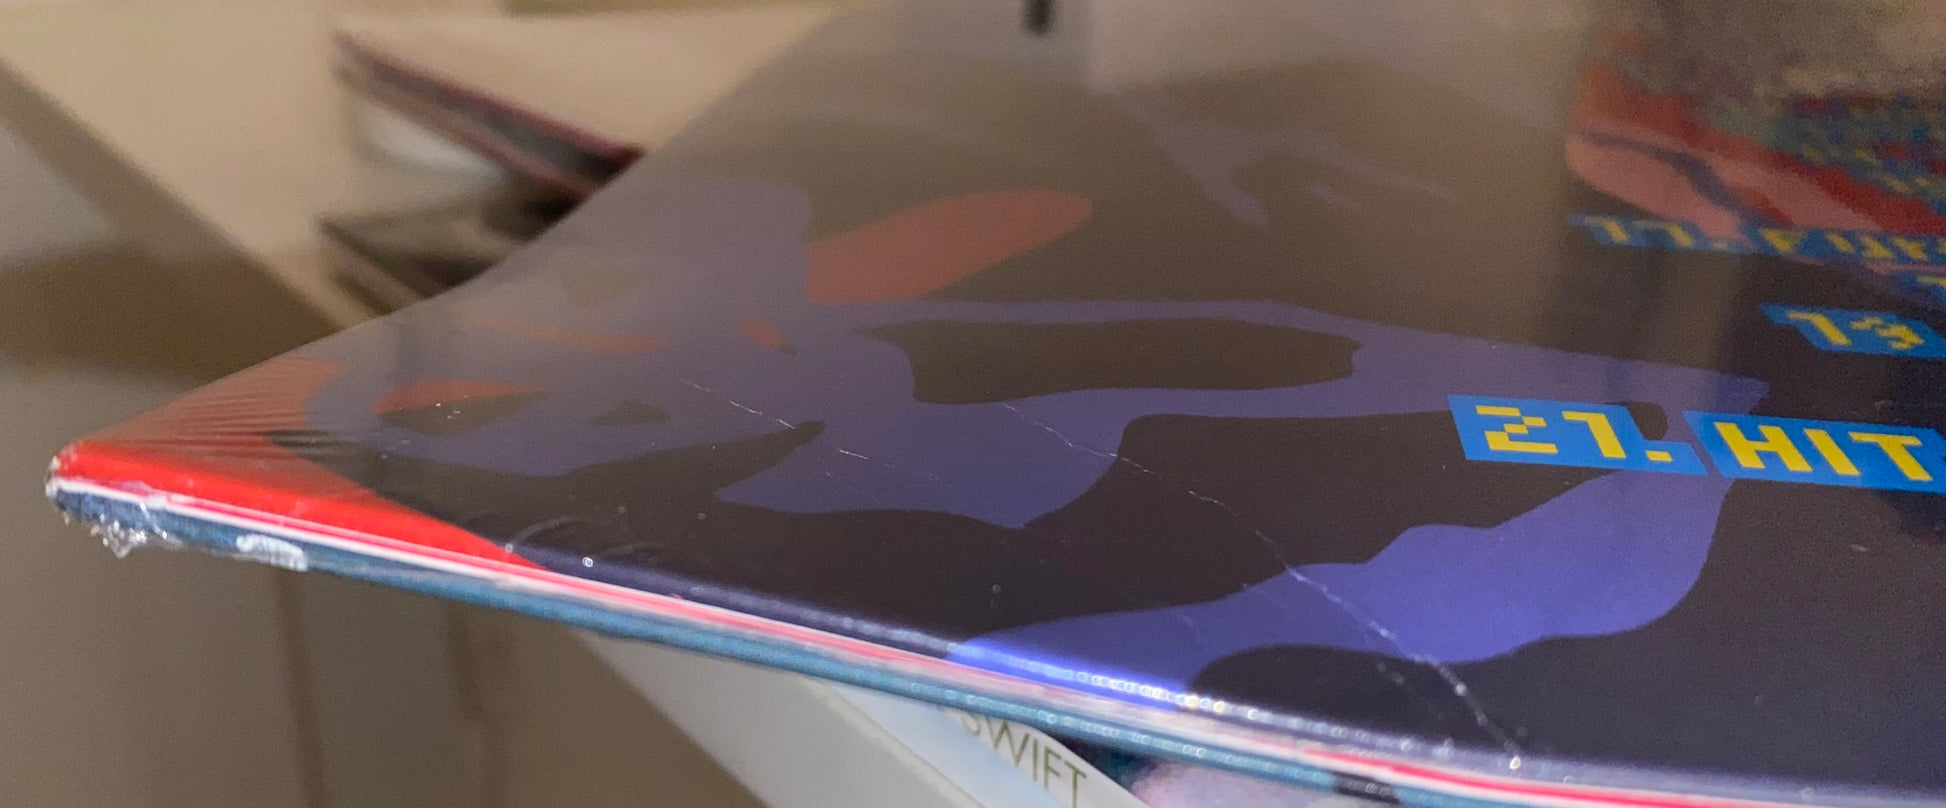 Kid Cudi - Signed Autographed INSANO Vinyl 2LP Album Art By KAWS *DAMAGED* - Spin City Records